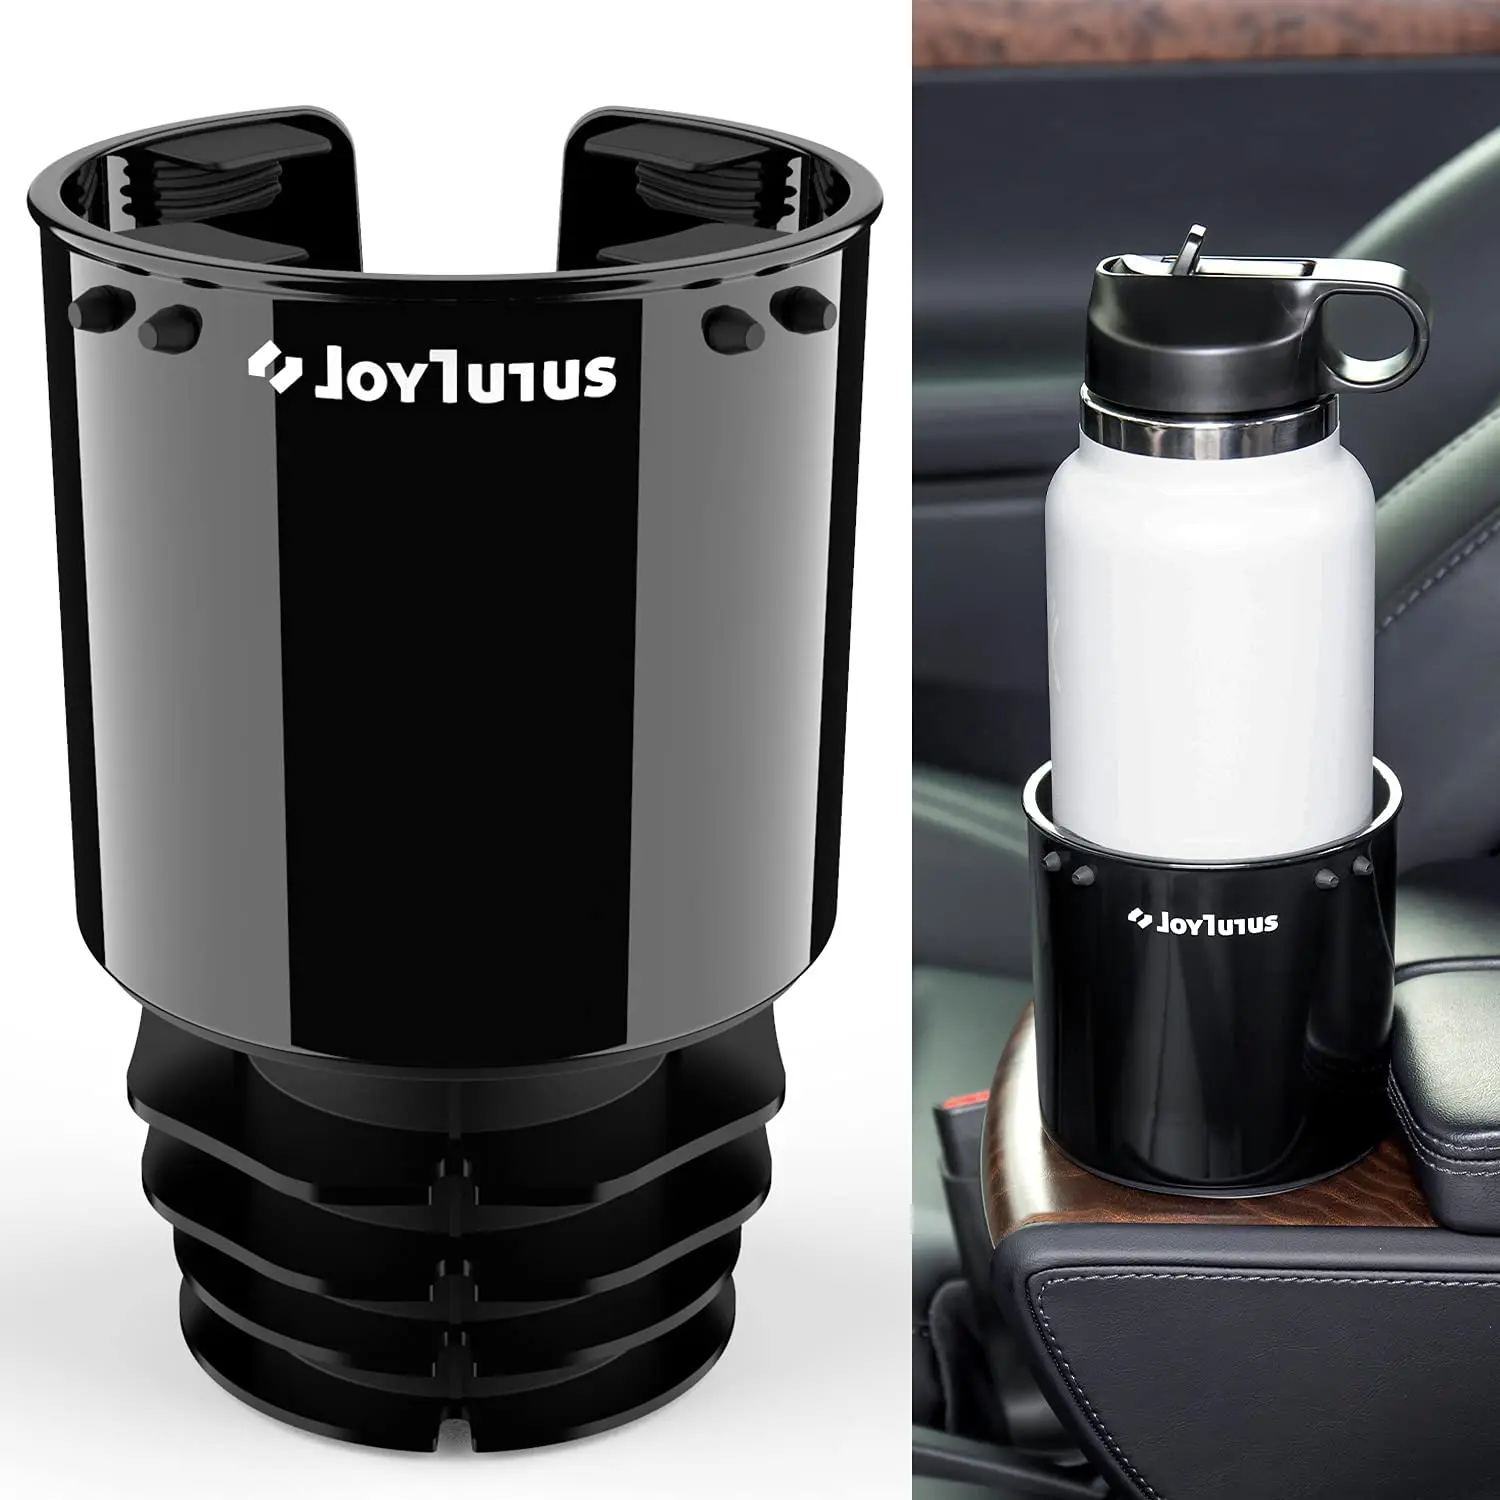 Black Universal Car Truck Fixed At The Air Outlet Plastic Cup Holder Bottle Holder for Water Cup Coffe Tumbler Drink Bottle 